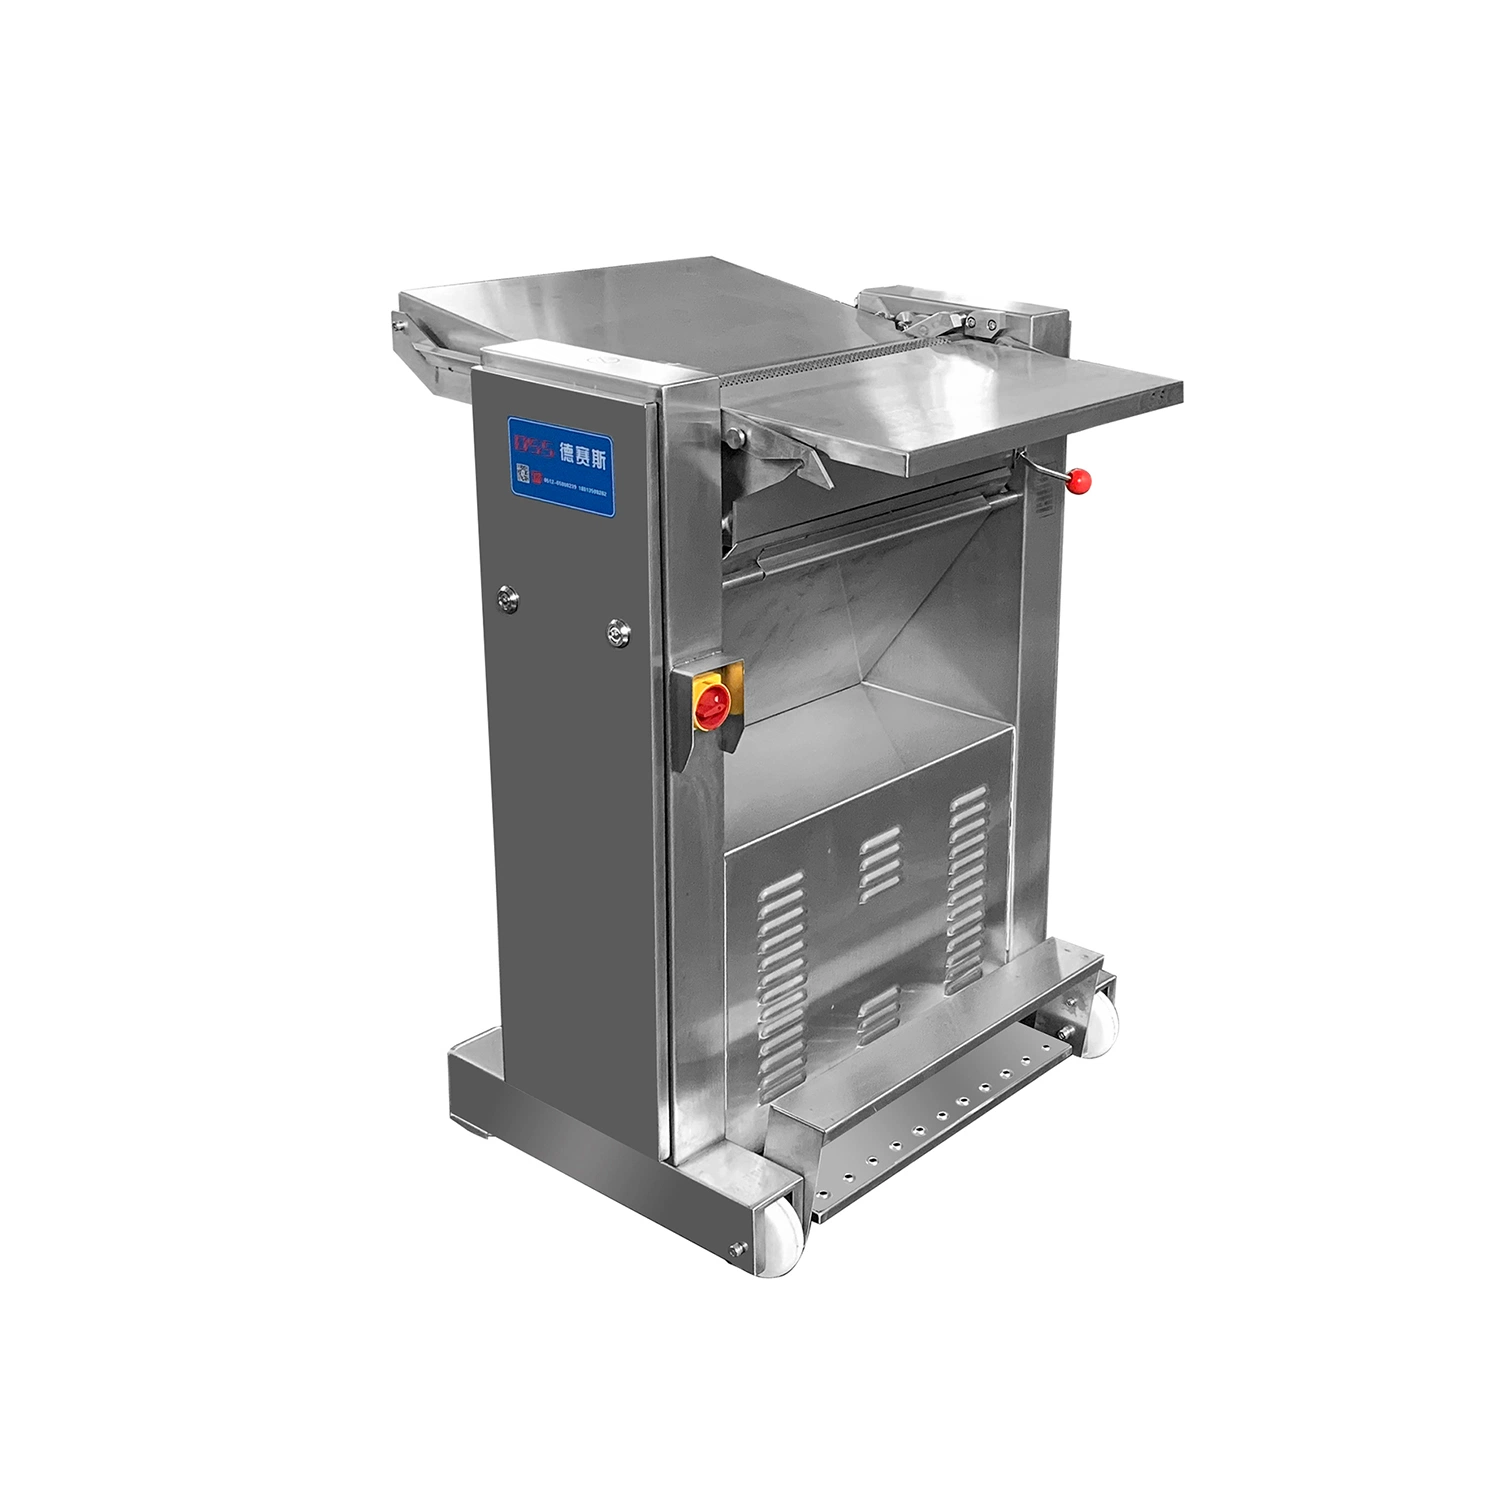 The Meat Processing Equipment Food Factory Processing Equipment Poultry Skinning Machine